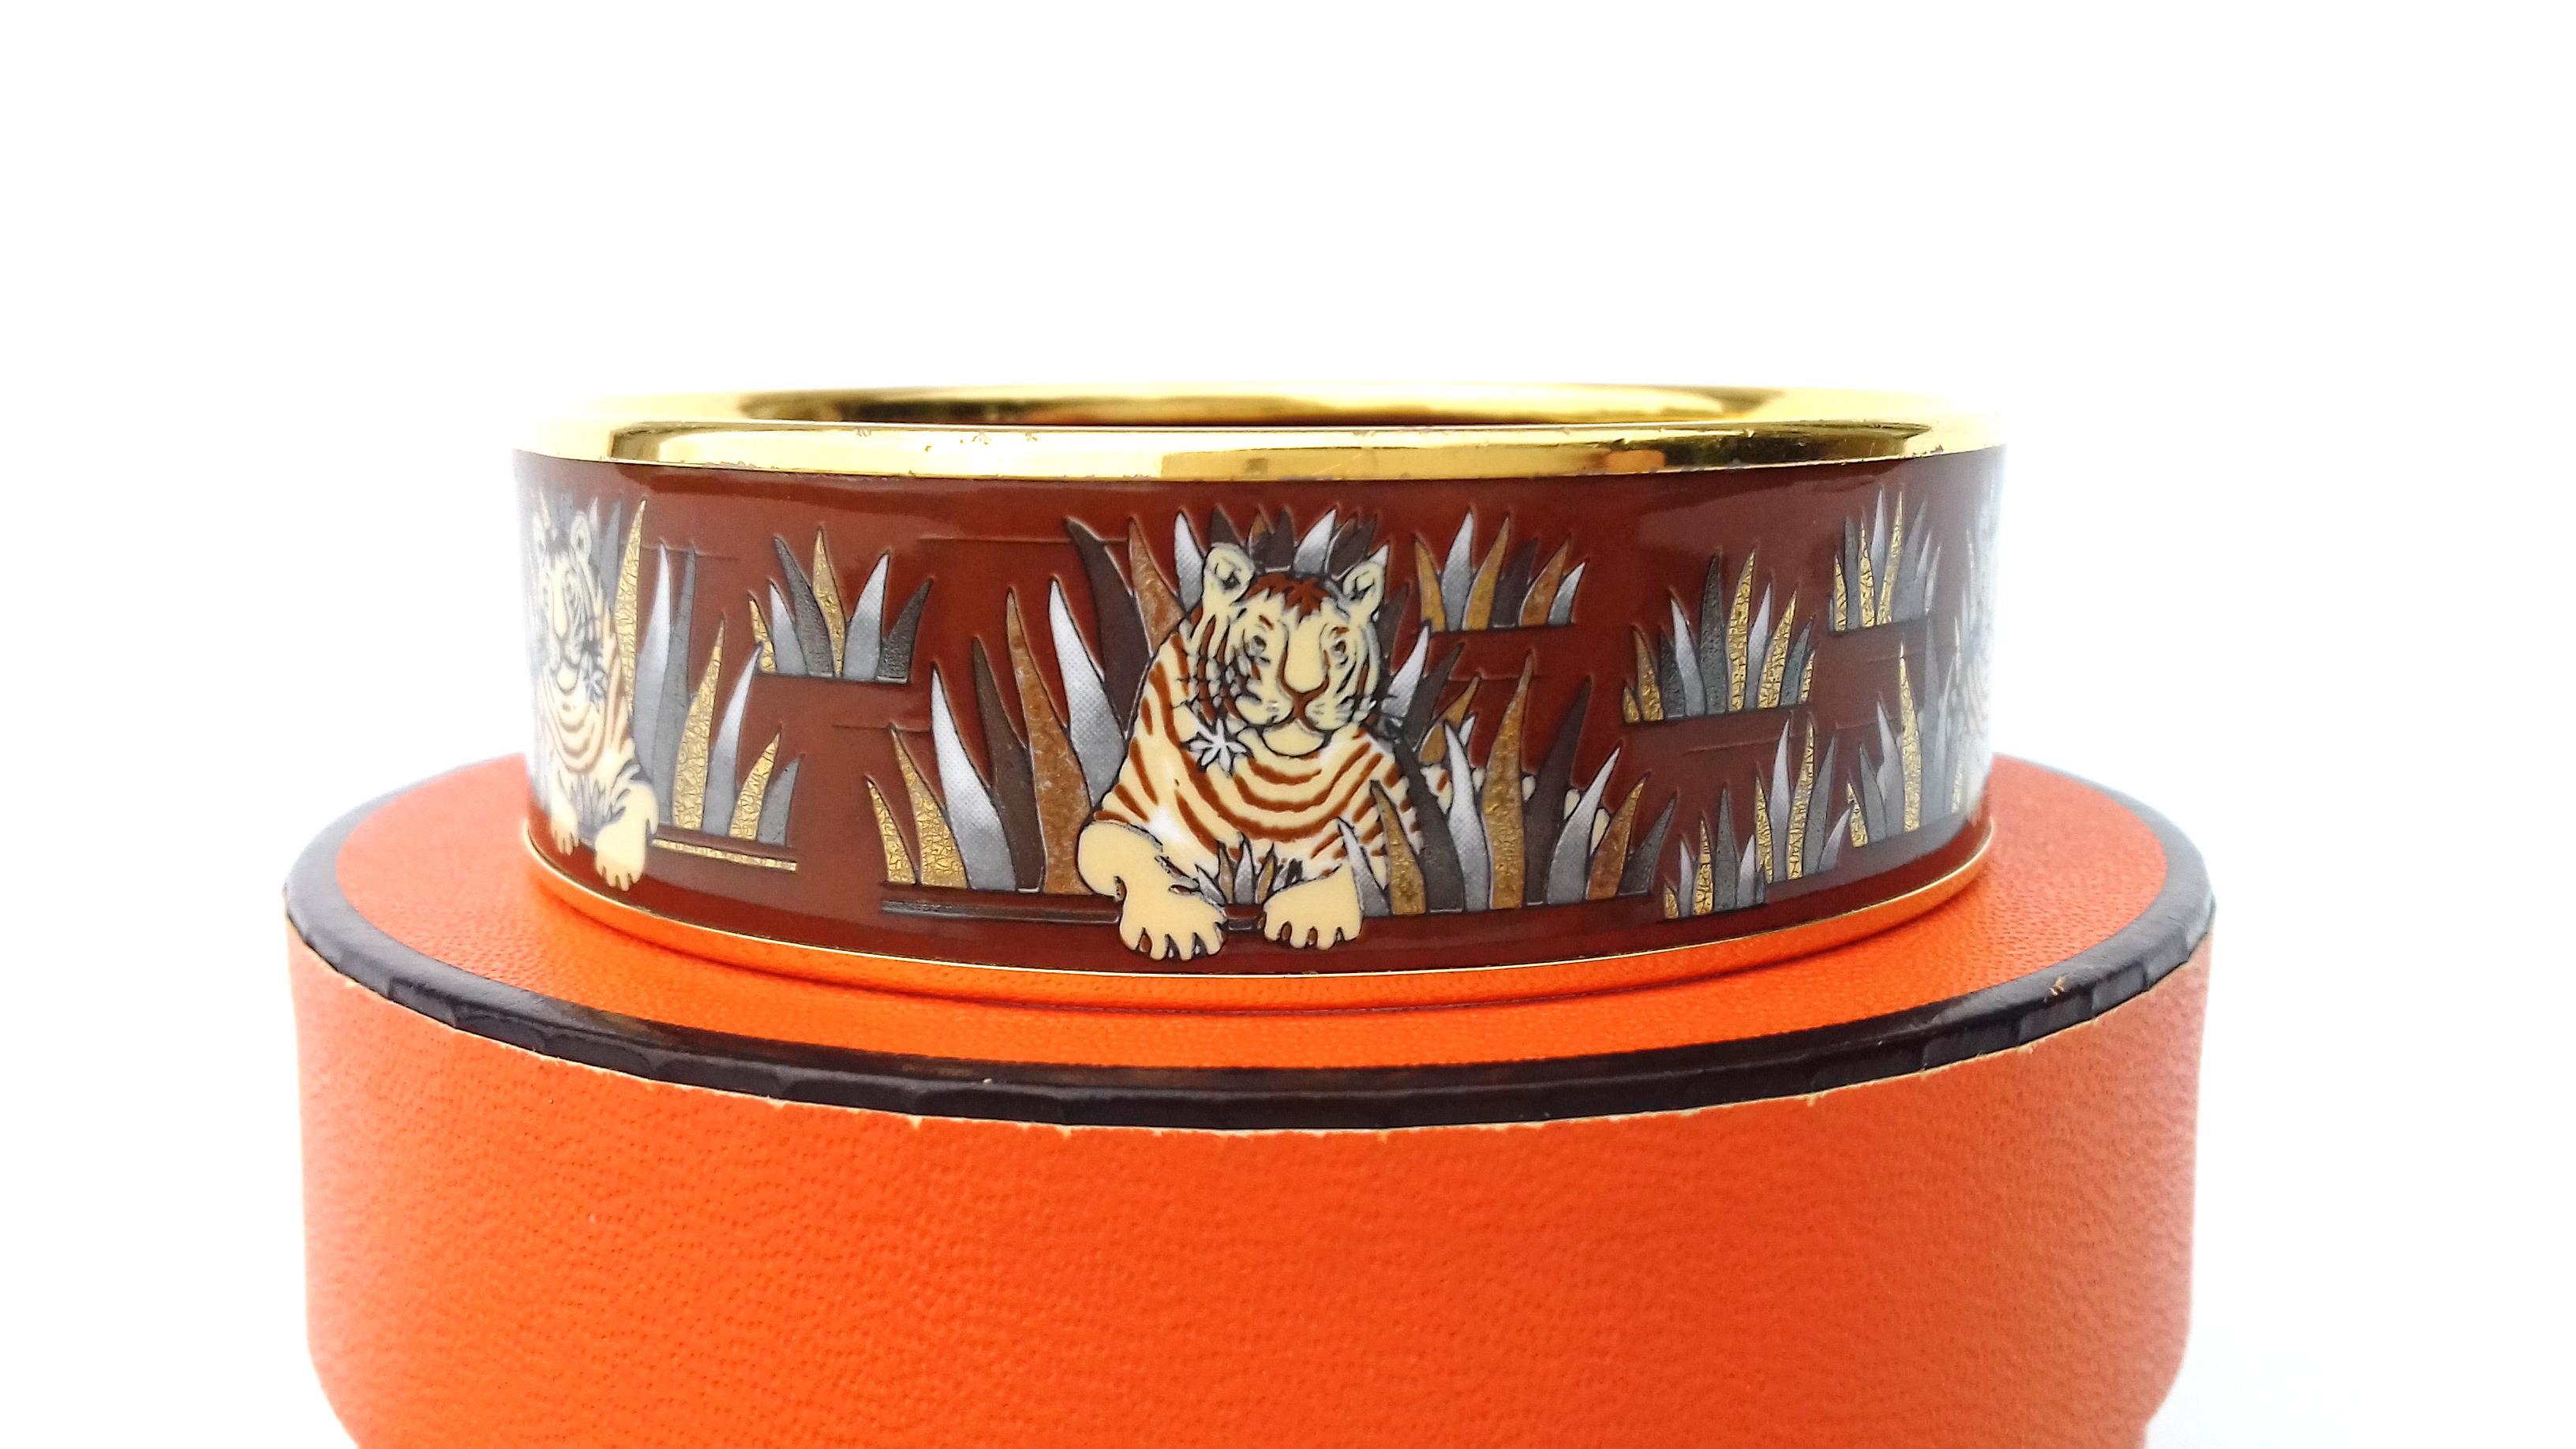 Extremely RARE and Beautiful Authentic Hermès Bracelet

Pattern: Tigers in the herbs

Designed by Joachim Metz in 1979 

This bracelet may come from a reissue

The bracelet is decorated with 6 drawings of tigers

Made in Austria

Vintage Item

Made